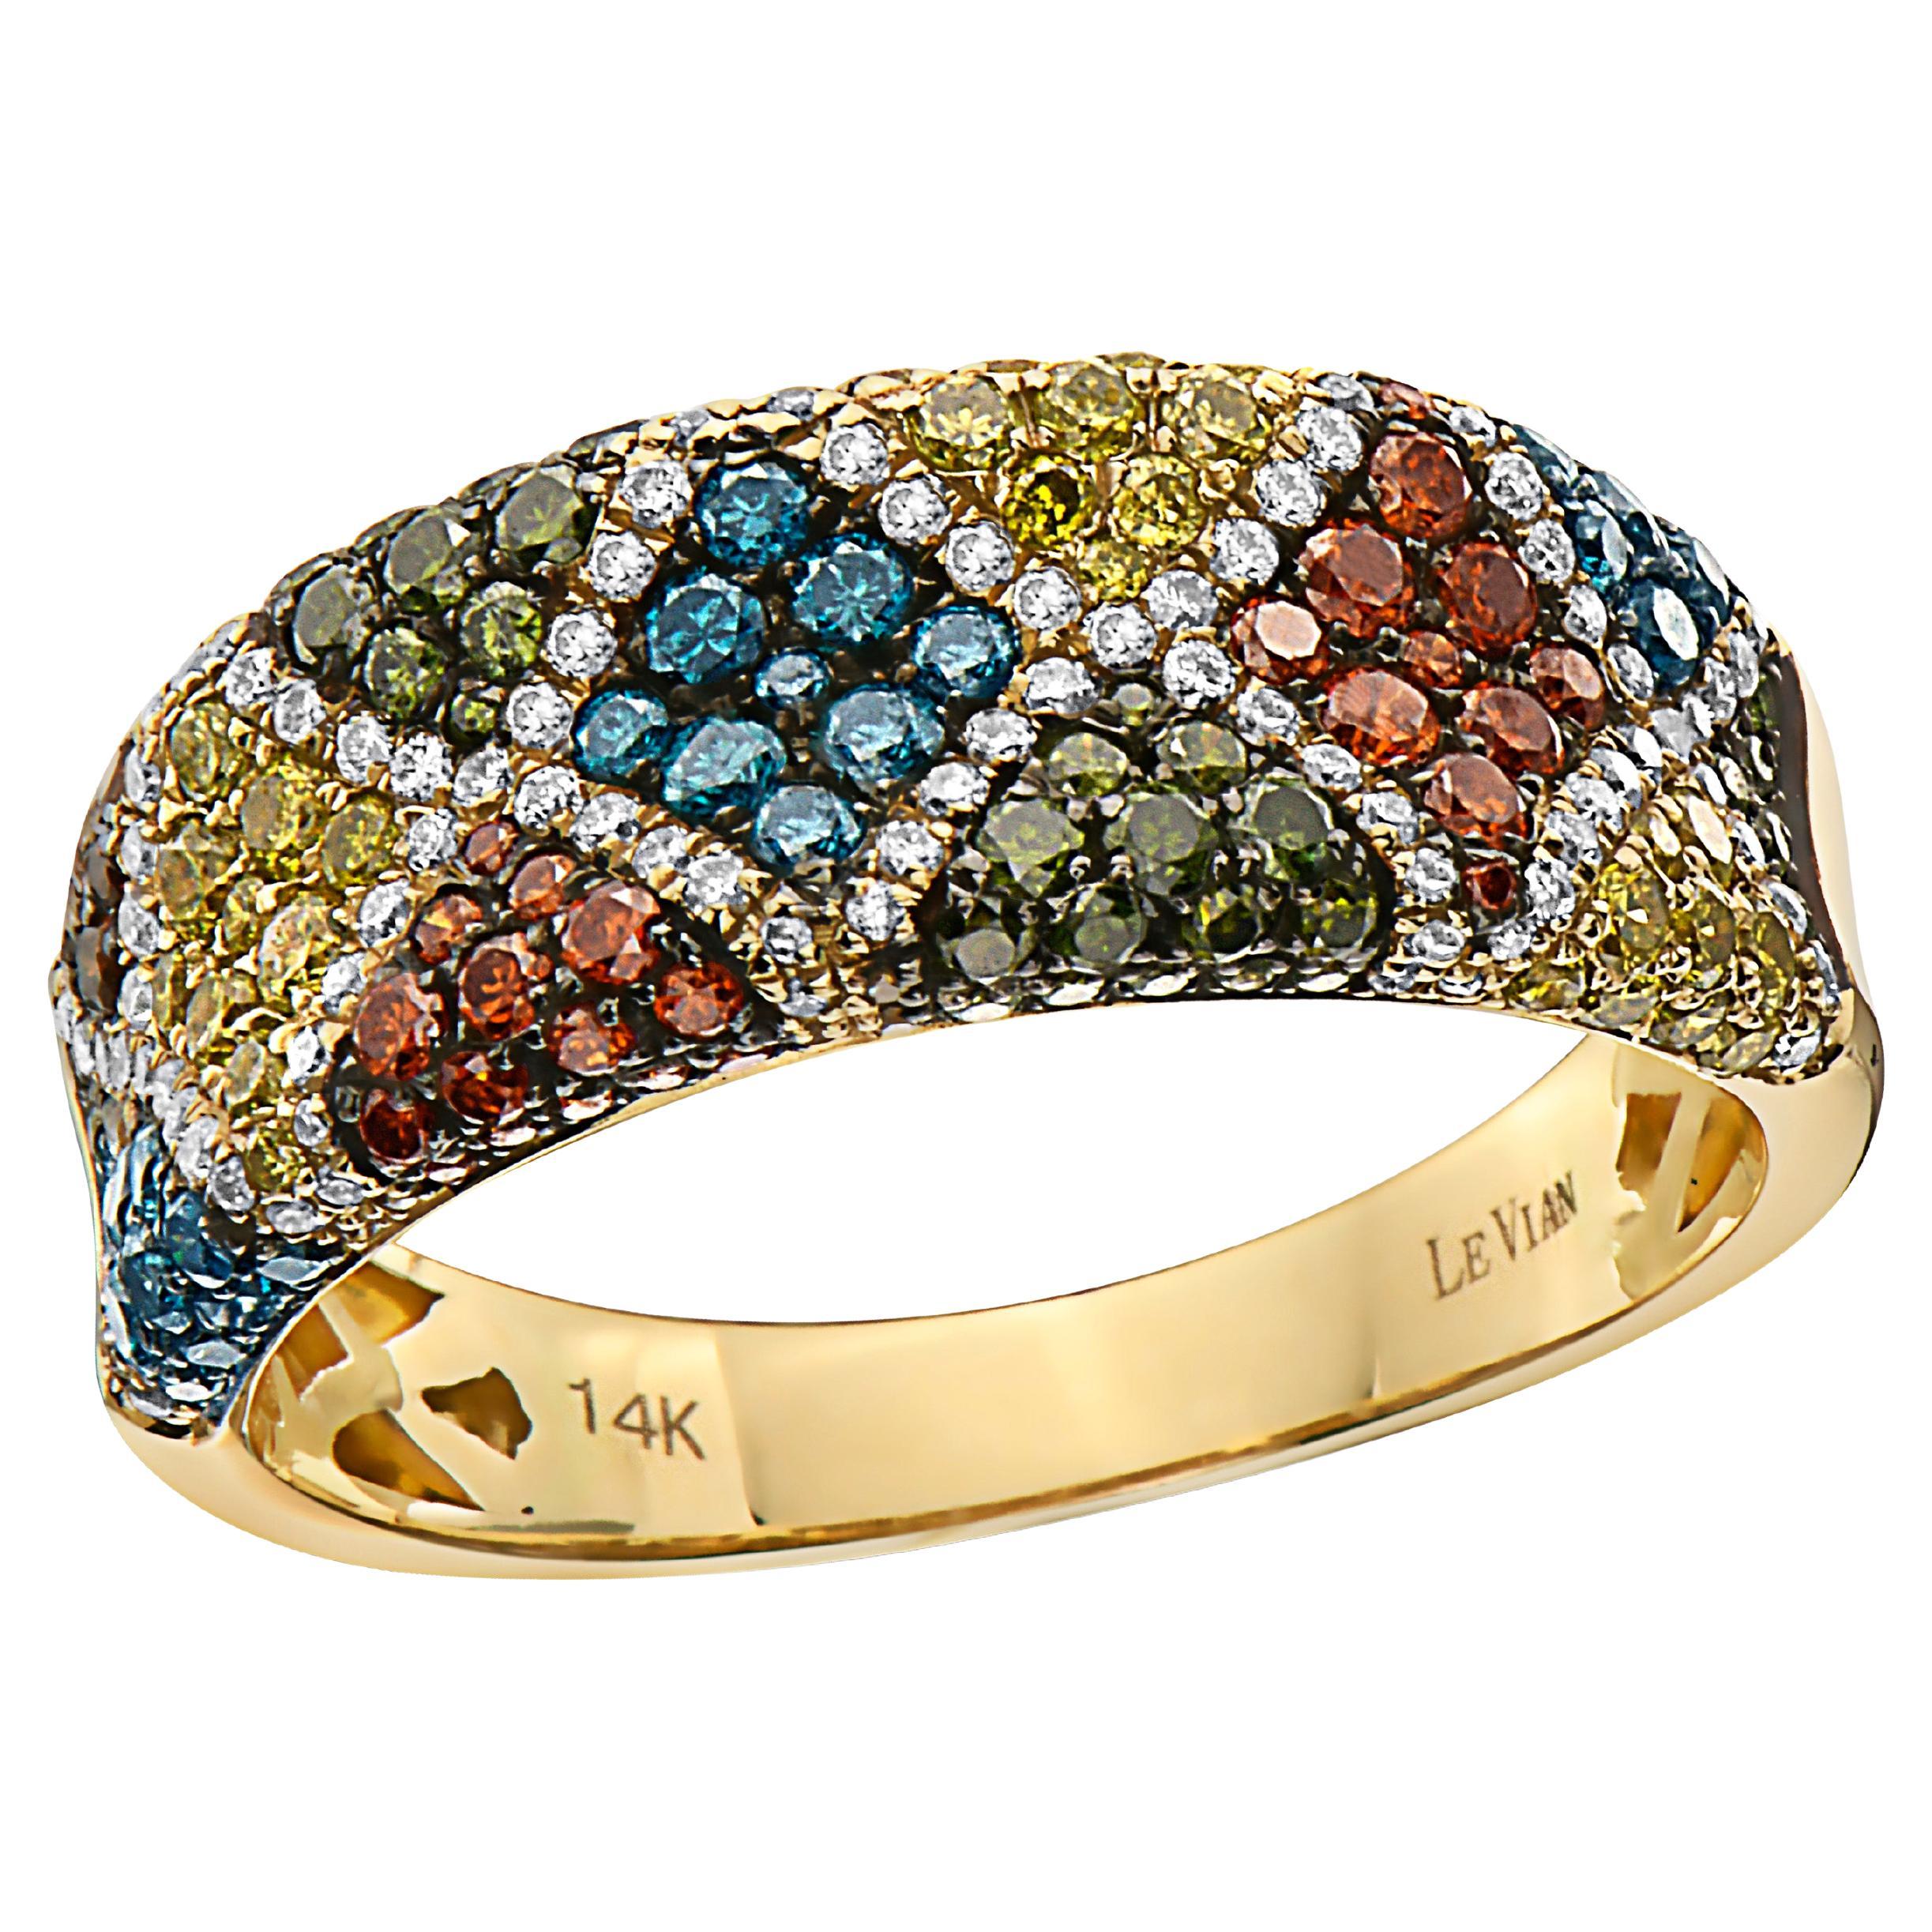 Levian Ring 1 1 4 Cts Blue Yellow White Natural Diamond Set in 14K Yellow Gold For Sale